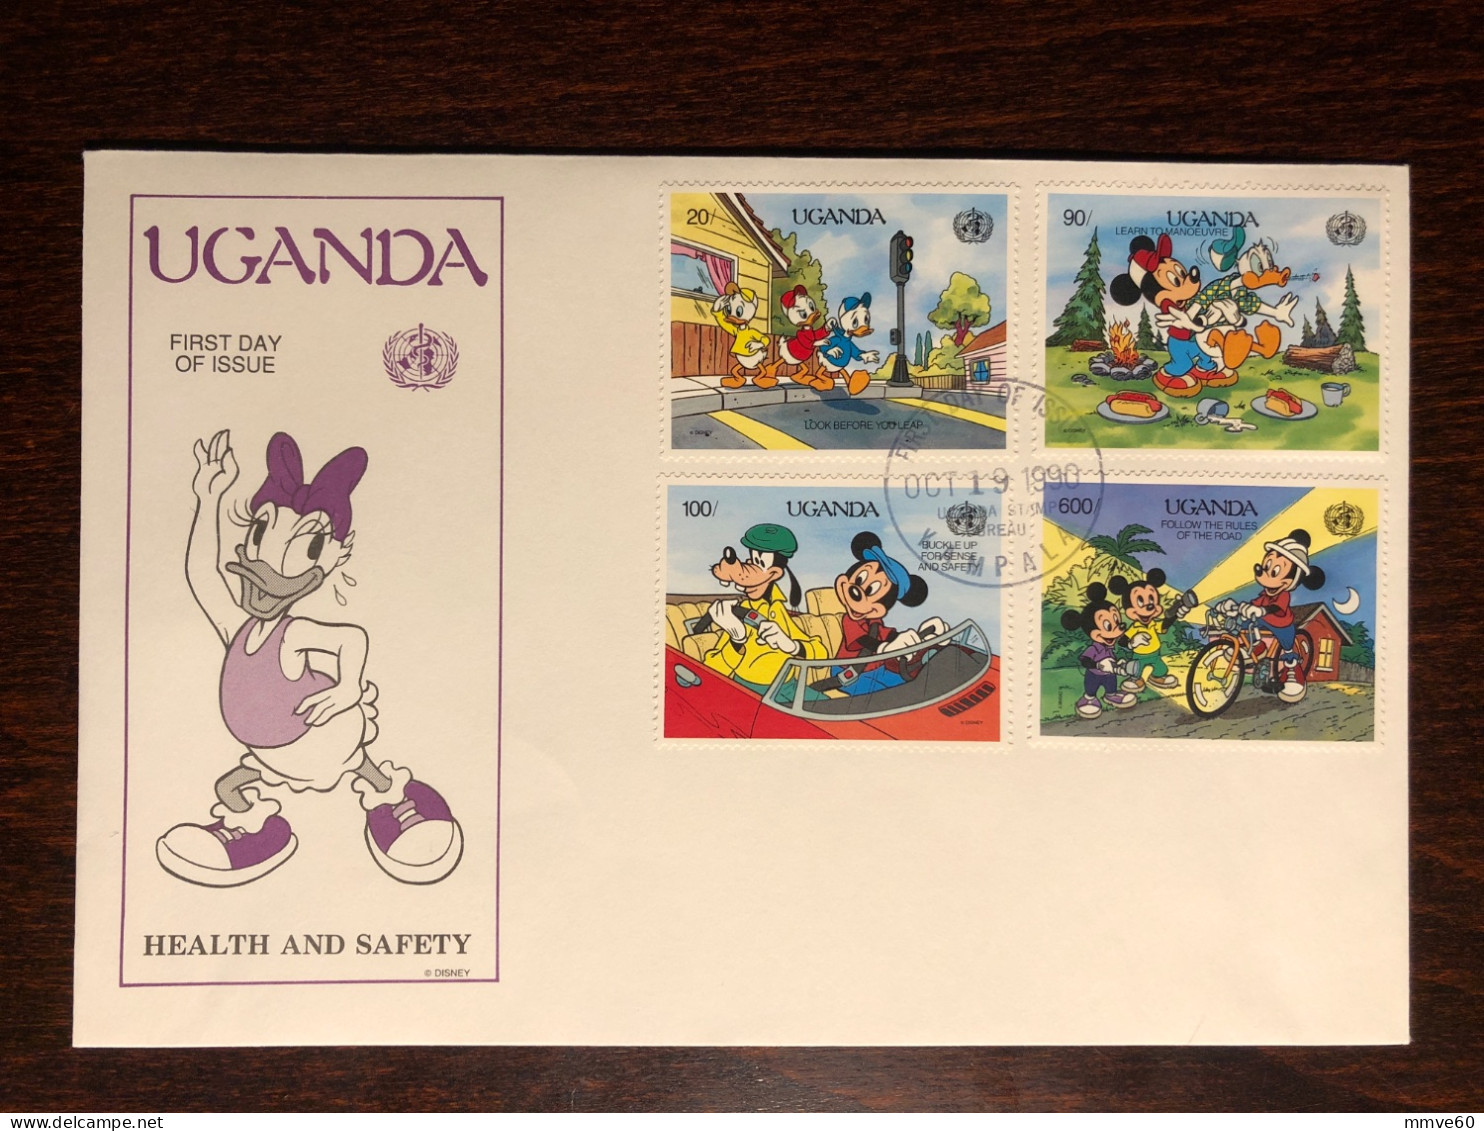 UGANDA FDC COVER 1990 YEAR HEALTH AND SAFETY HEALTH MEDICINE STAMPS - Ouganda (1962-...)